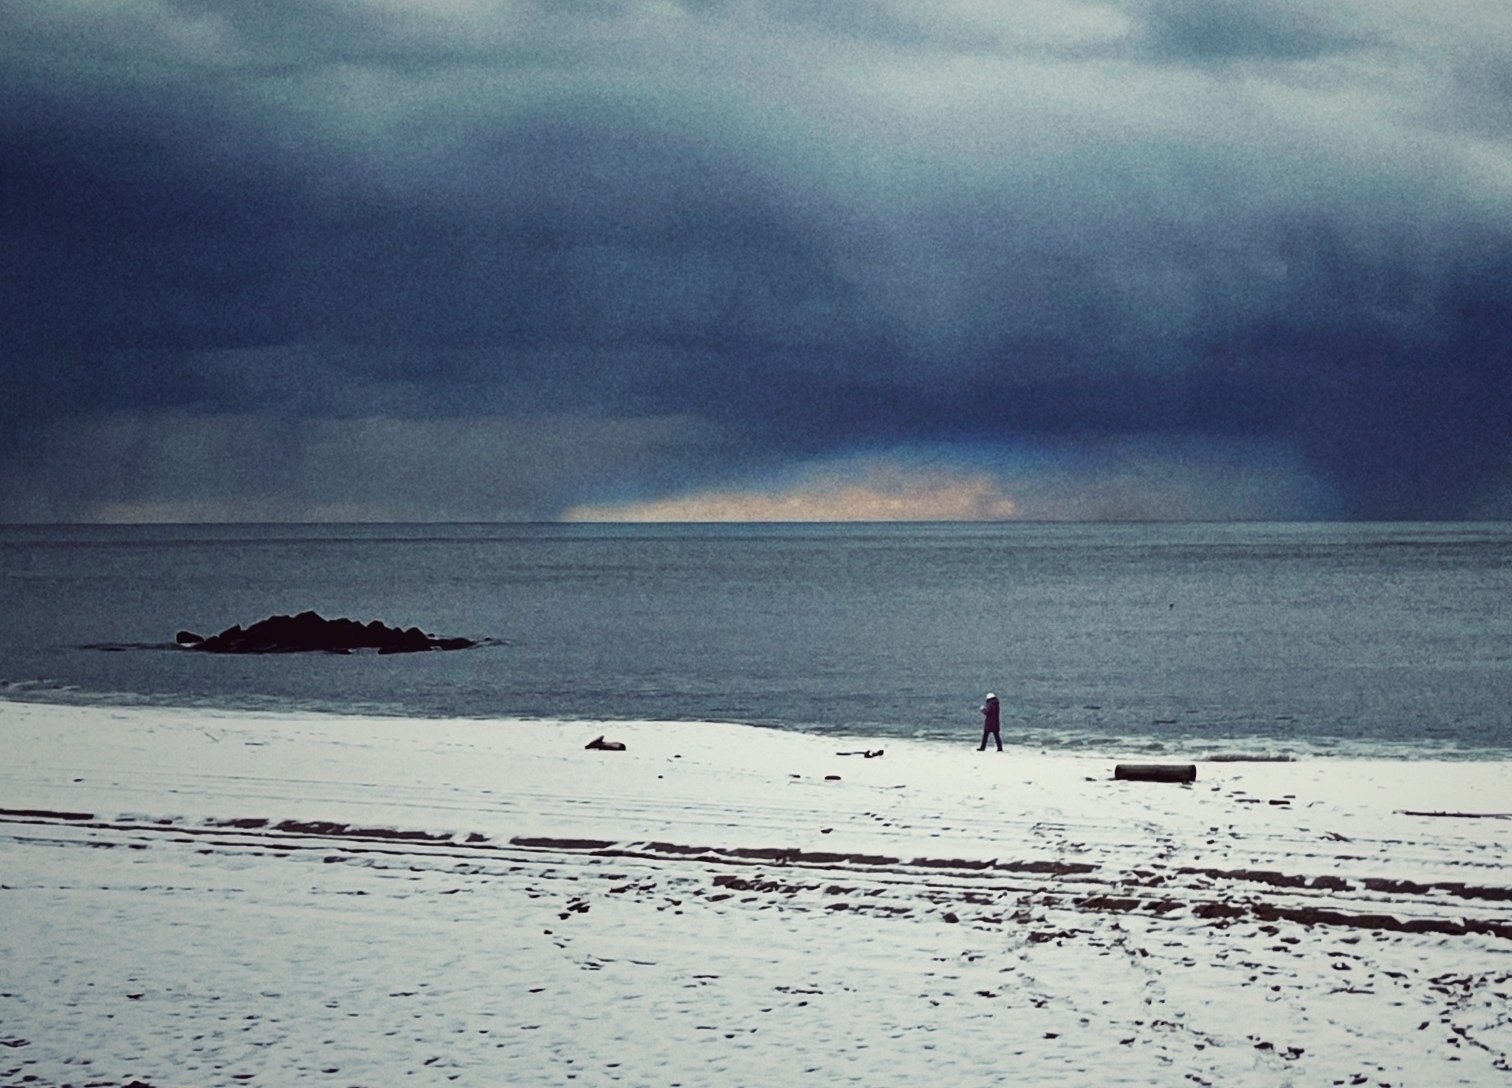 Snow on the beach, a person walking against the sea in the background. Dark blue clouds are hanging above